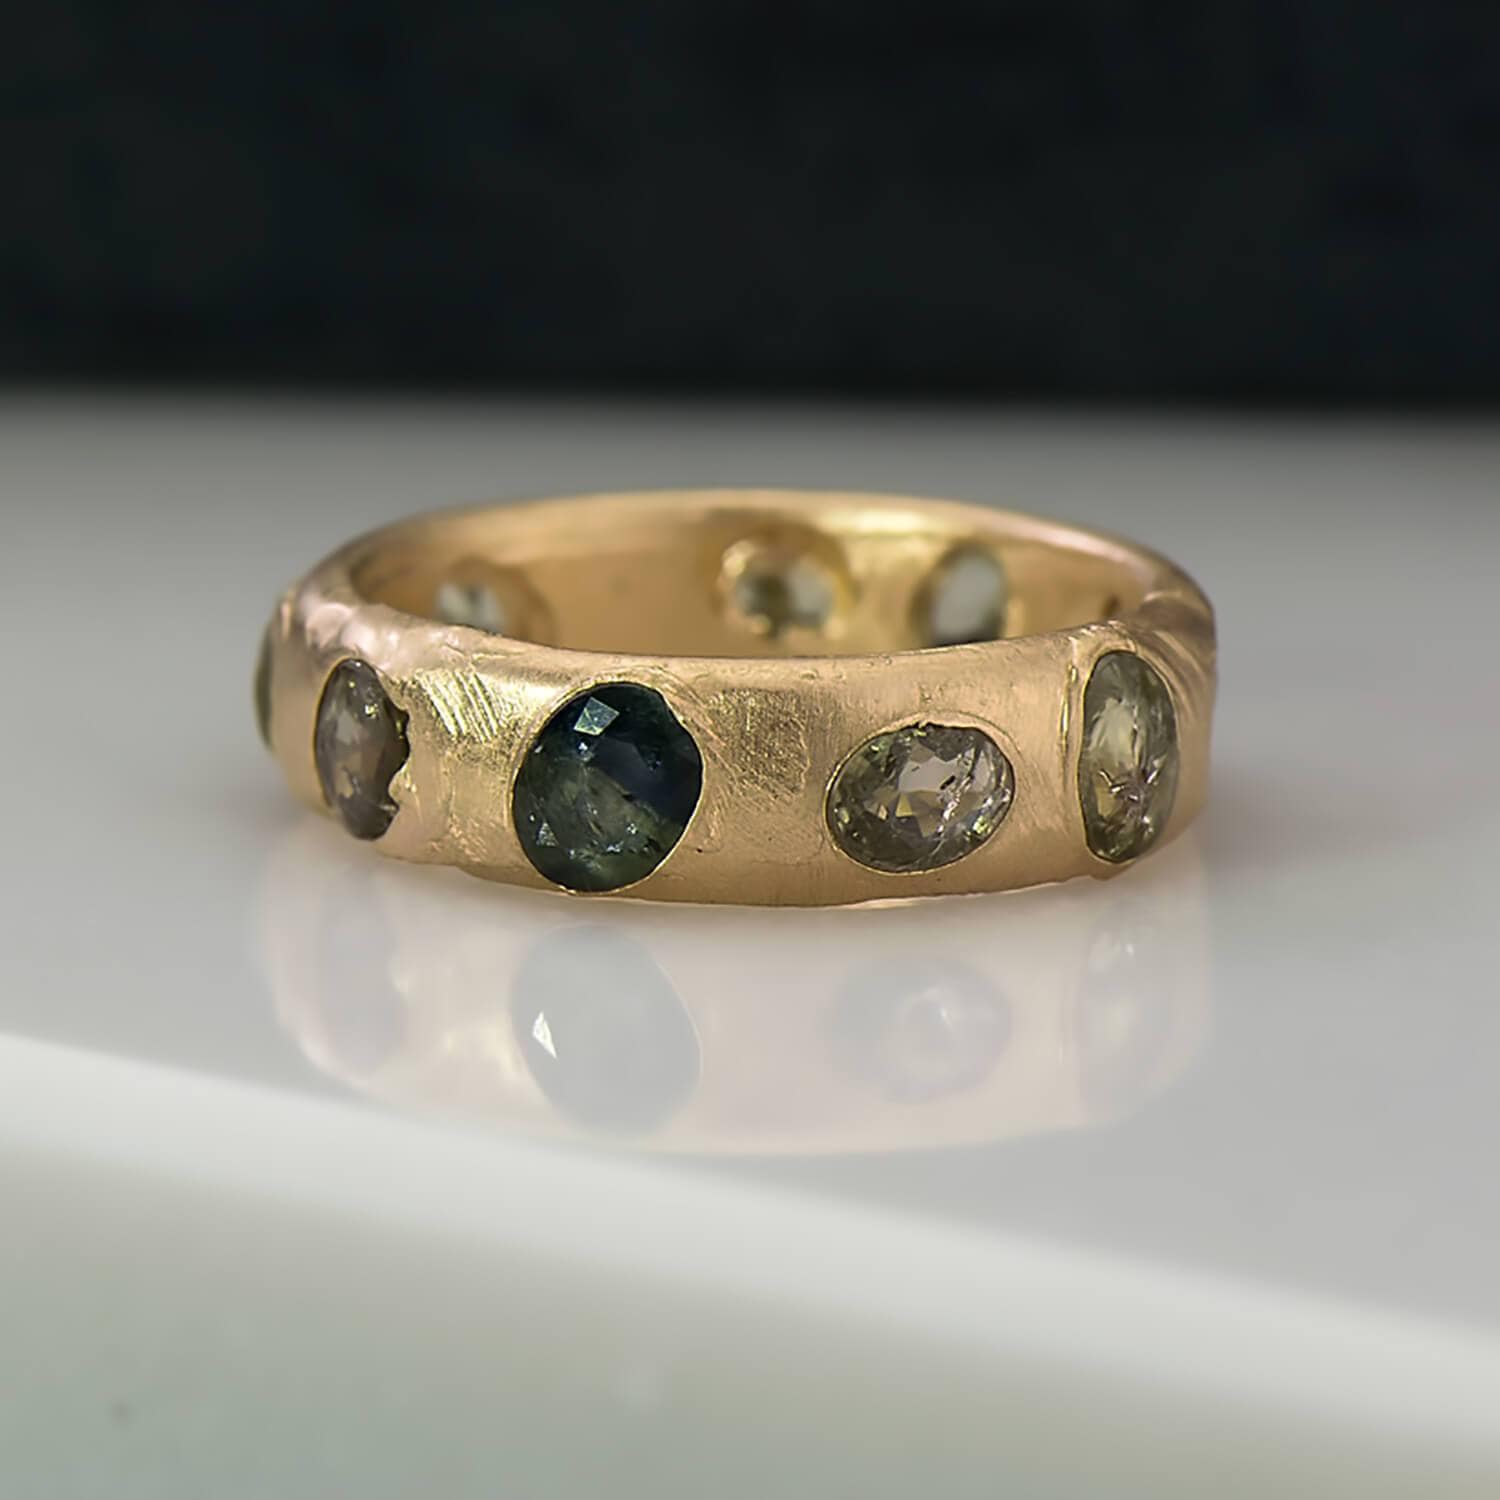 Recycled 14 karat yellow gold wedding ring with  10 recycled natural green sapphires in which have been set in cast. The band is has a luxe sheen with the width being 5mm and the thickness, 1.8mm